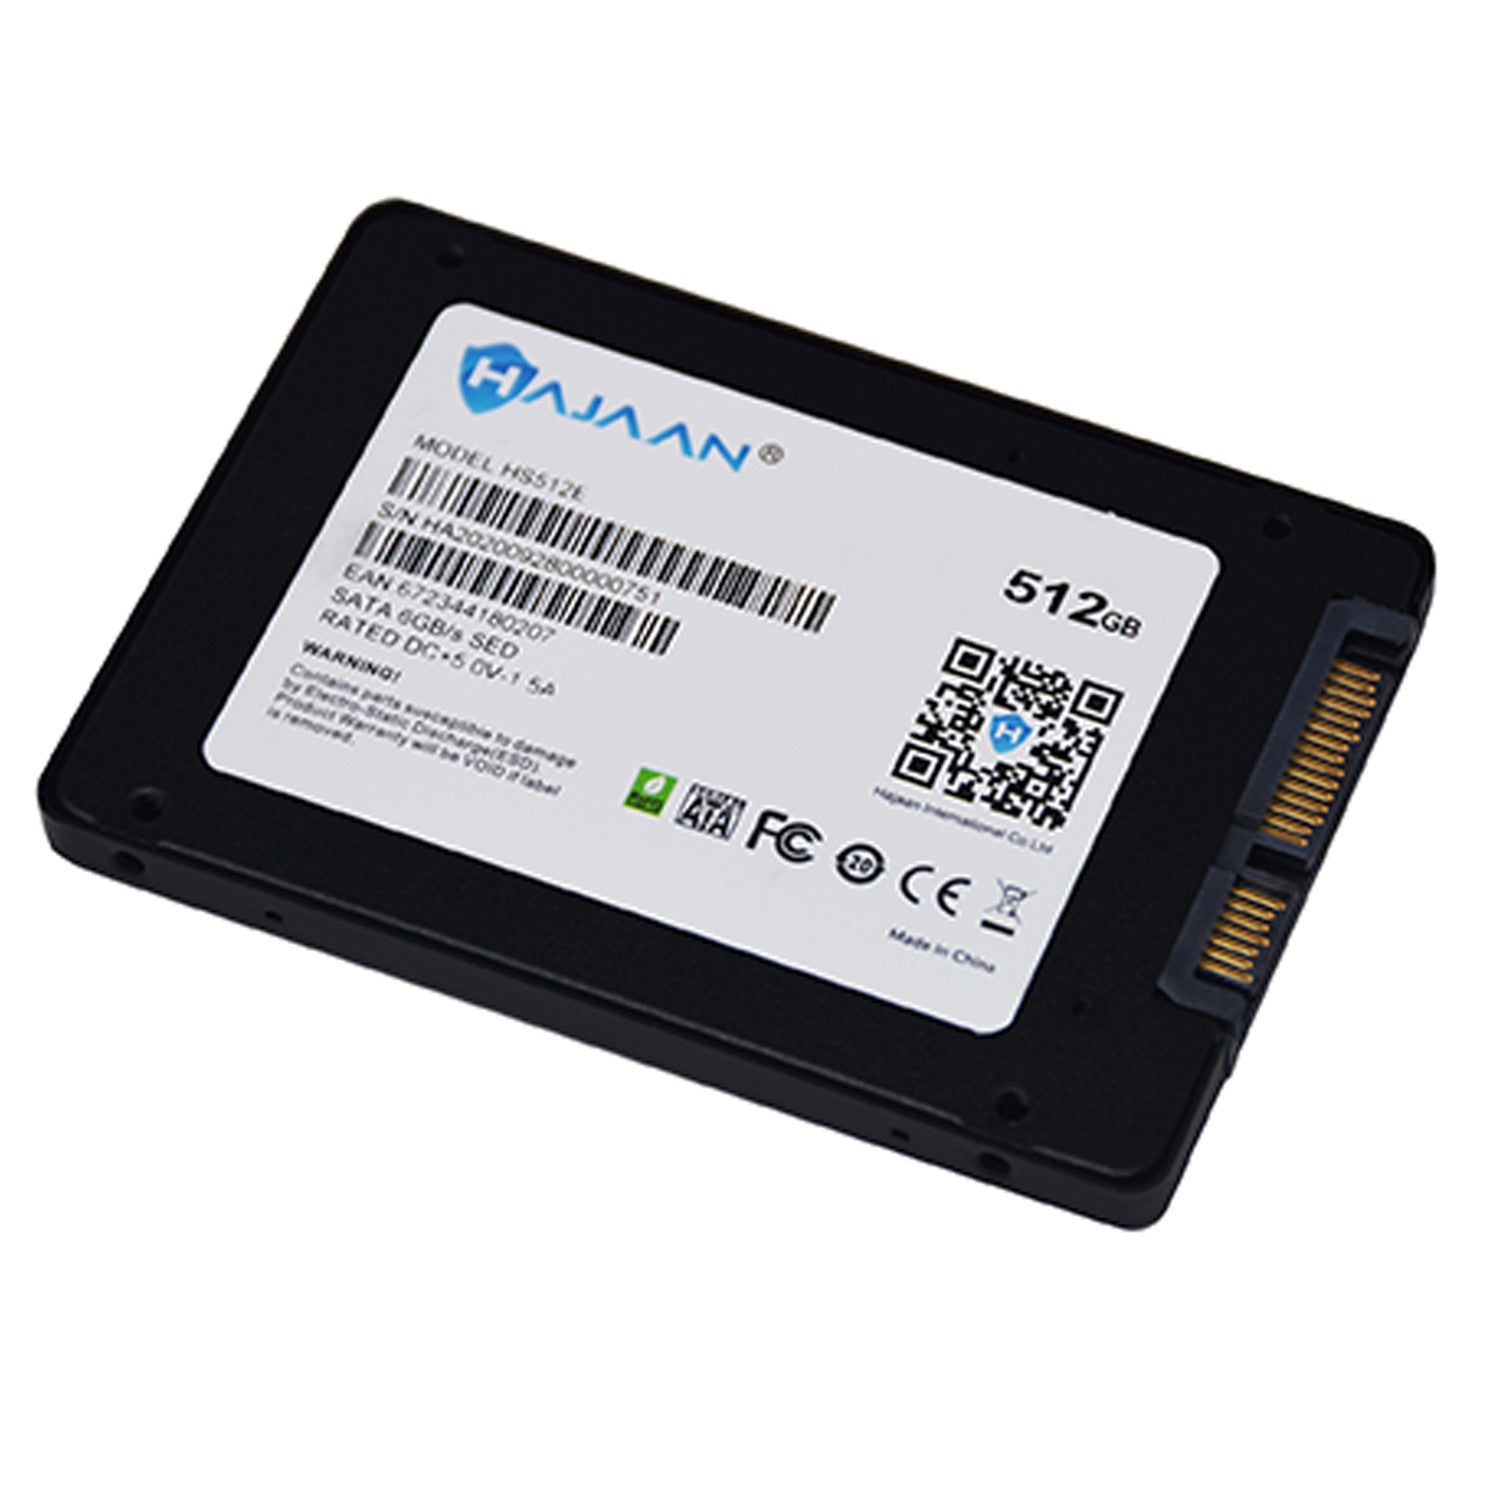 HAJAAN 512 GB Internal PC SSD – SATA III 6 Gb/s, 3D NAND TLC 2.5" Up to 550 MB/S, Internal Solid State Drive for Laptop Tablet PC Desktop 1 Year Warranty